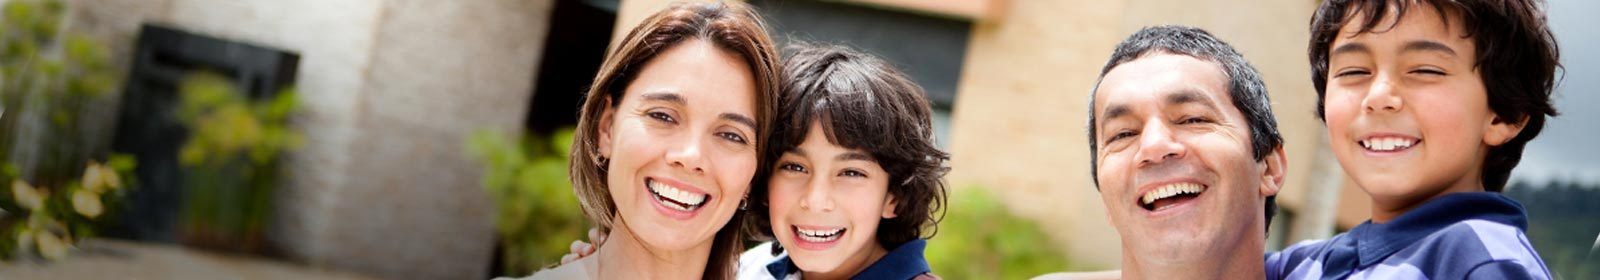 Register for Healthy Homes Healthy Families: A Series of Regional Symposia